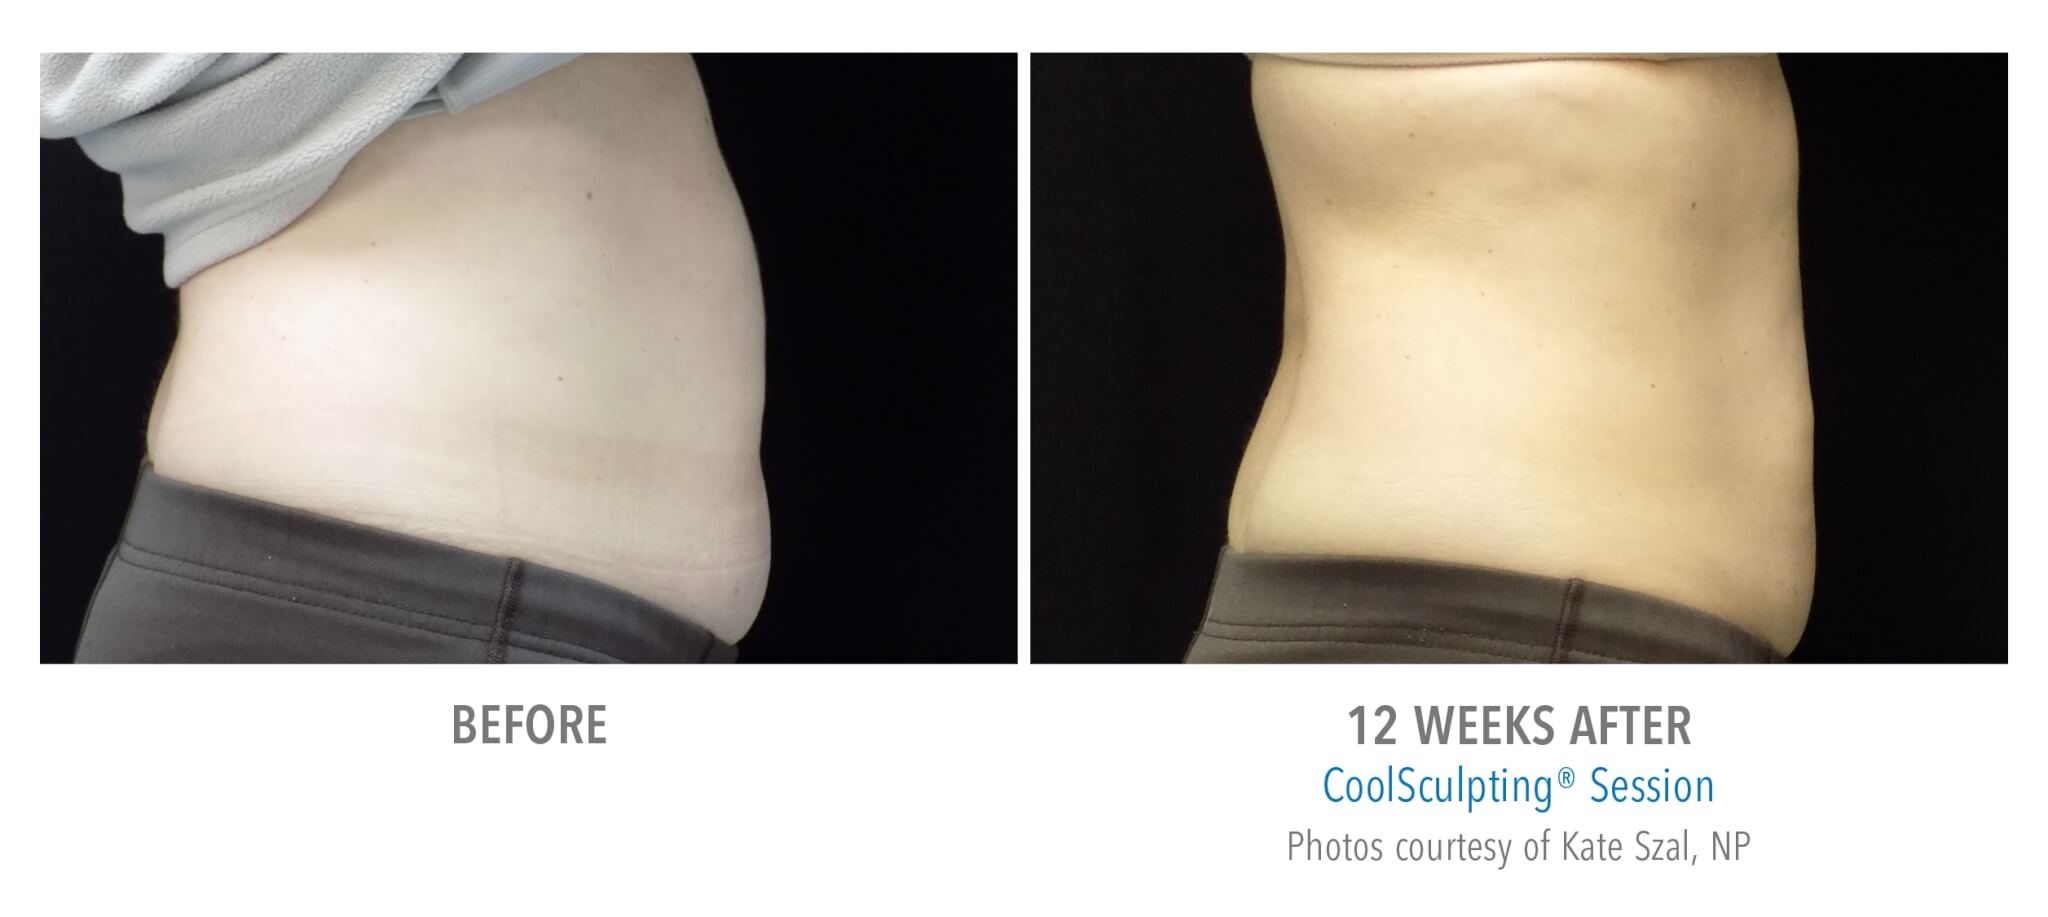 abdomen-side-3 coolsculpting patient before and after